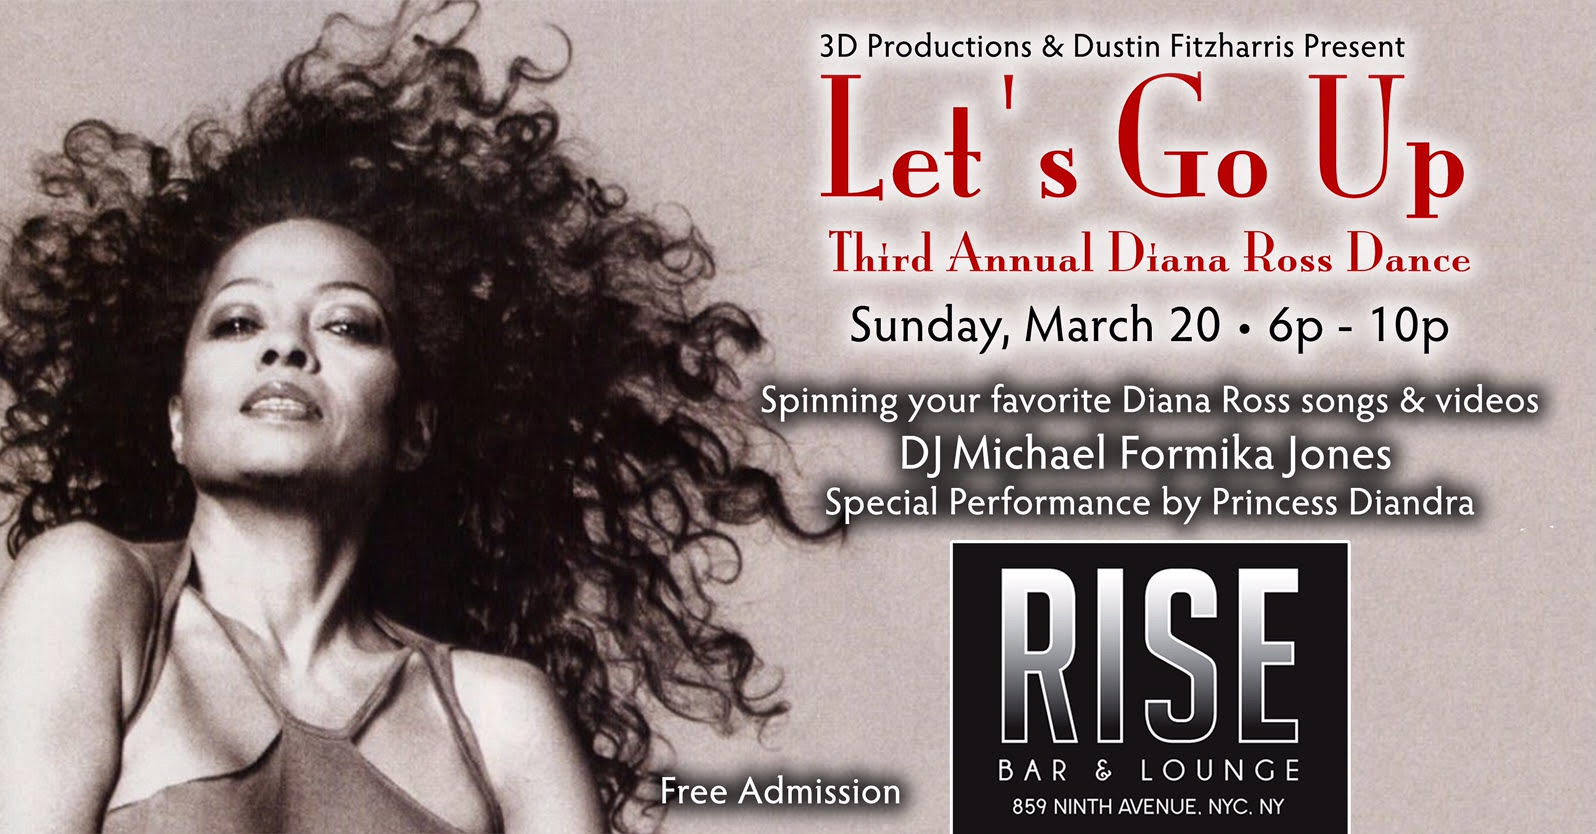  Let’s Go Up: The Third Annual Diana Ross Dance @ RISE Br & Lounge